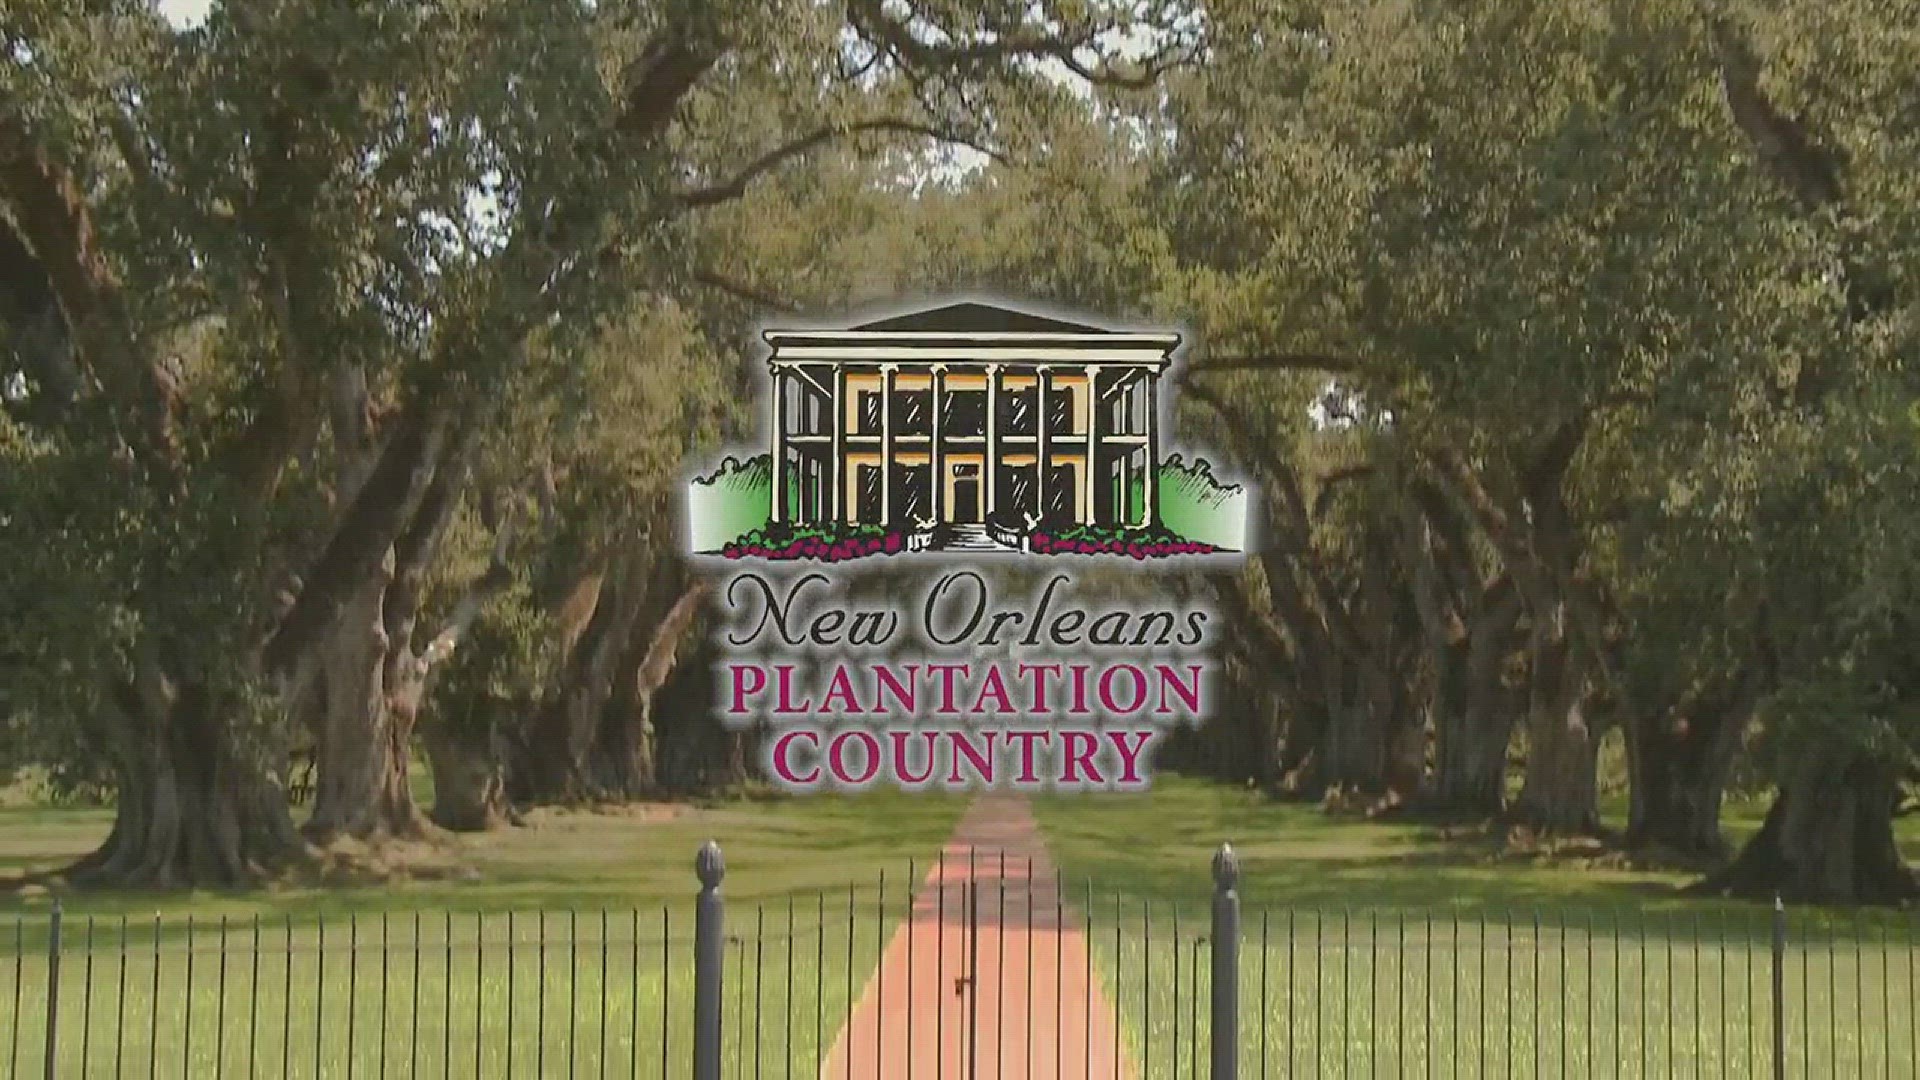 A look at places to visit on a tank of gas or less: This installment includes New Orleans Plantations.